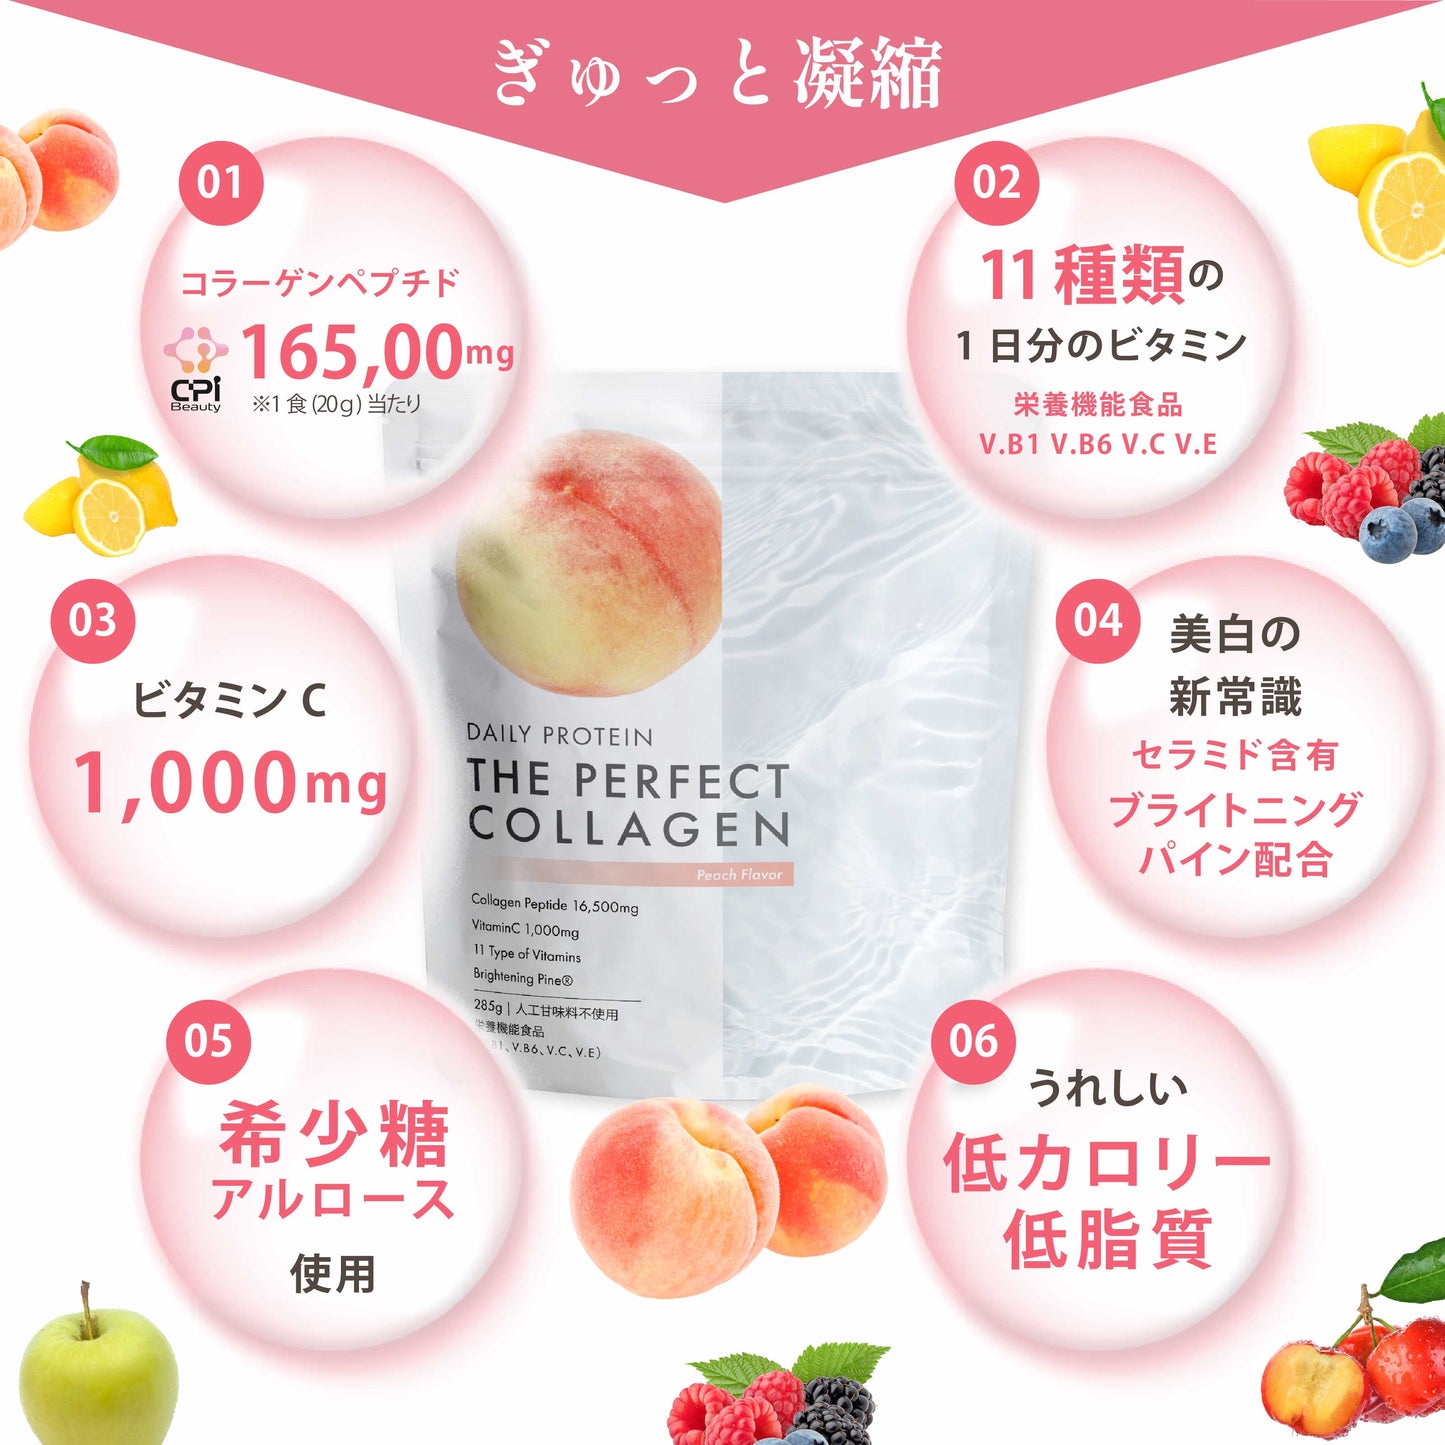 Daily Protein THE PERFECT COLLAGEN アセロラ味 285g